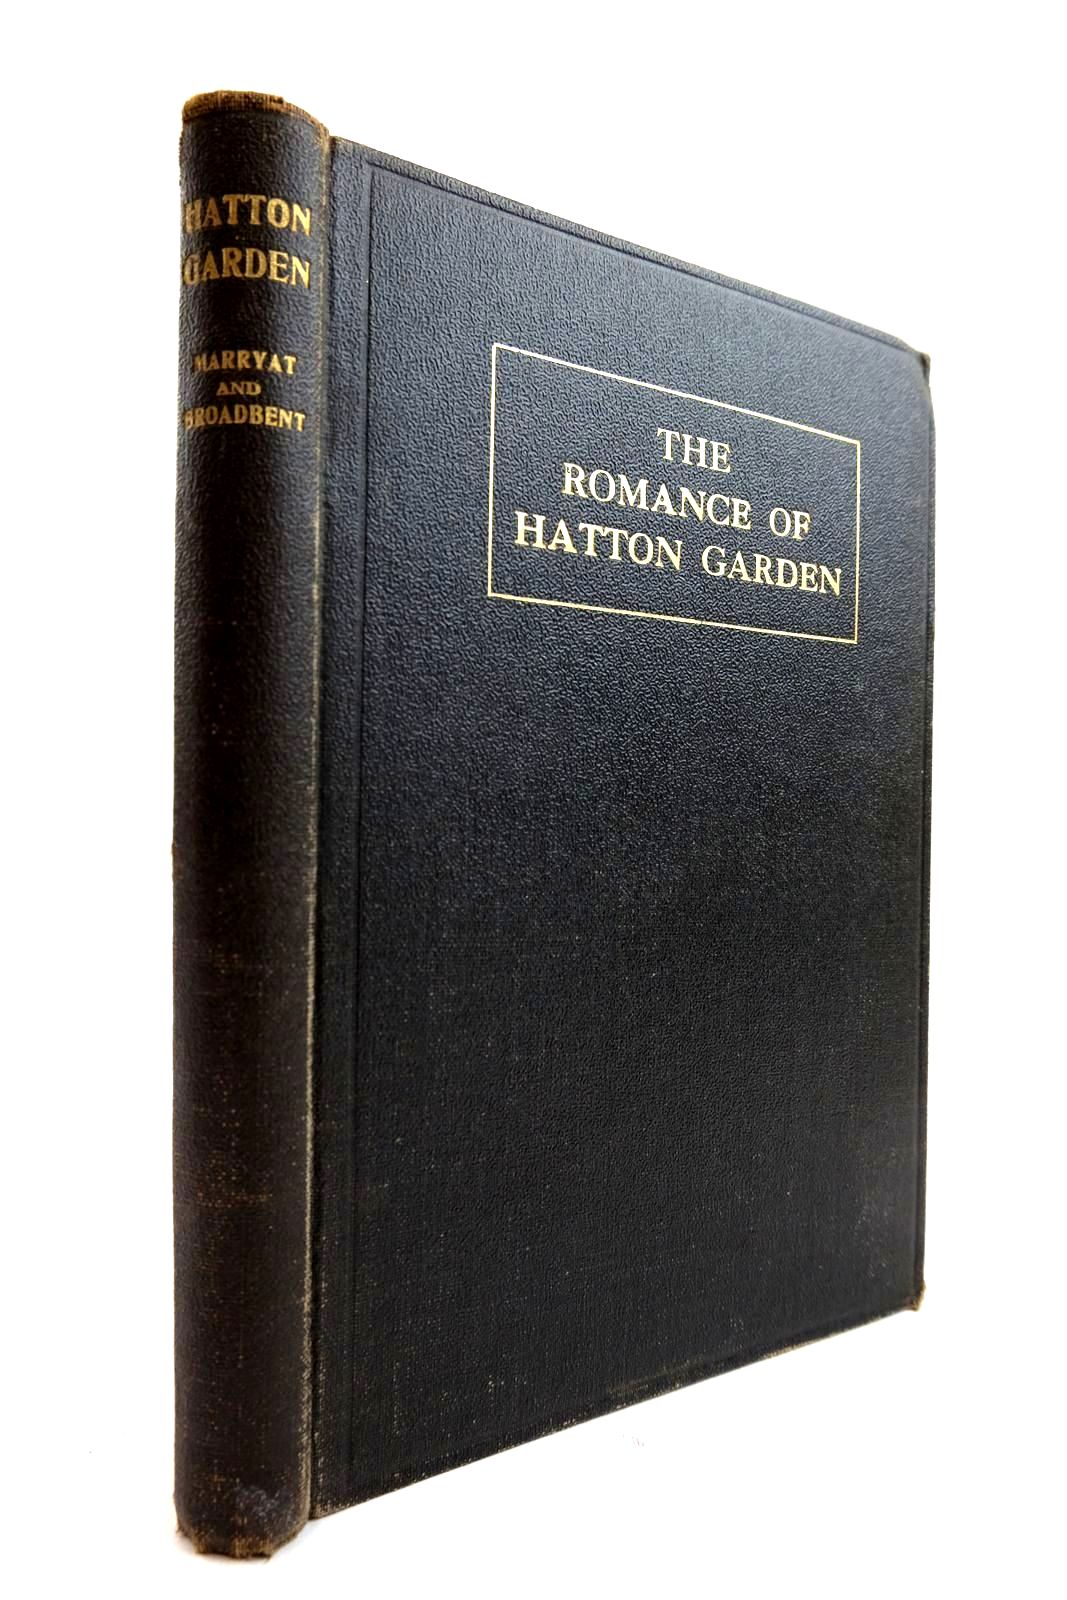 Photo of THE ROMANCE OF HATTON GARDEN written by Marryat, H. Broadbent, Una published by James Cornish &amp; Sons (STOCK CODE: 2134260)  for sale by Stella & Rose's Books